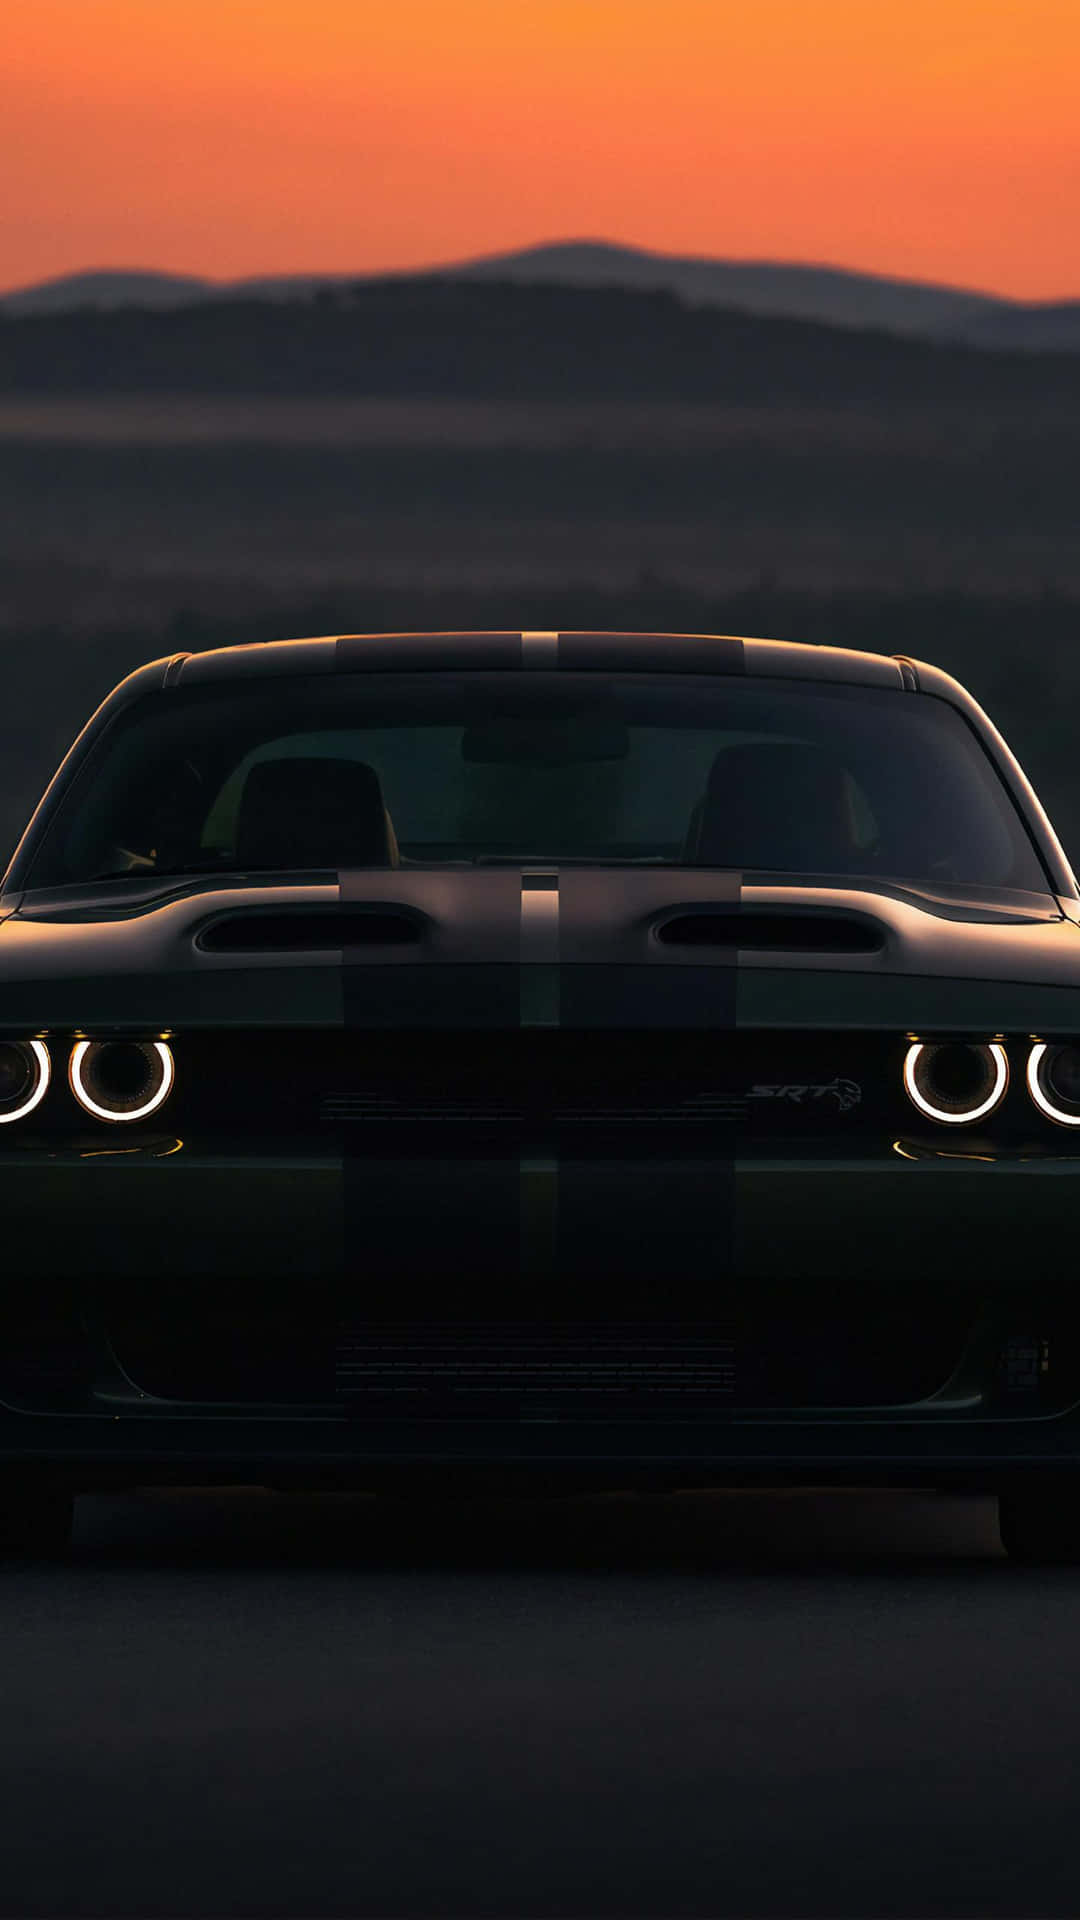 Upgrade Your Technology with a Hellcat iPhone Wallpaper